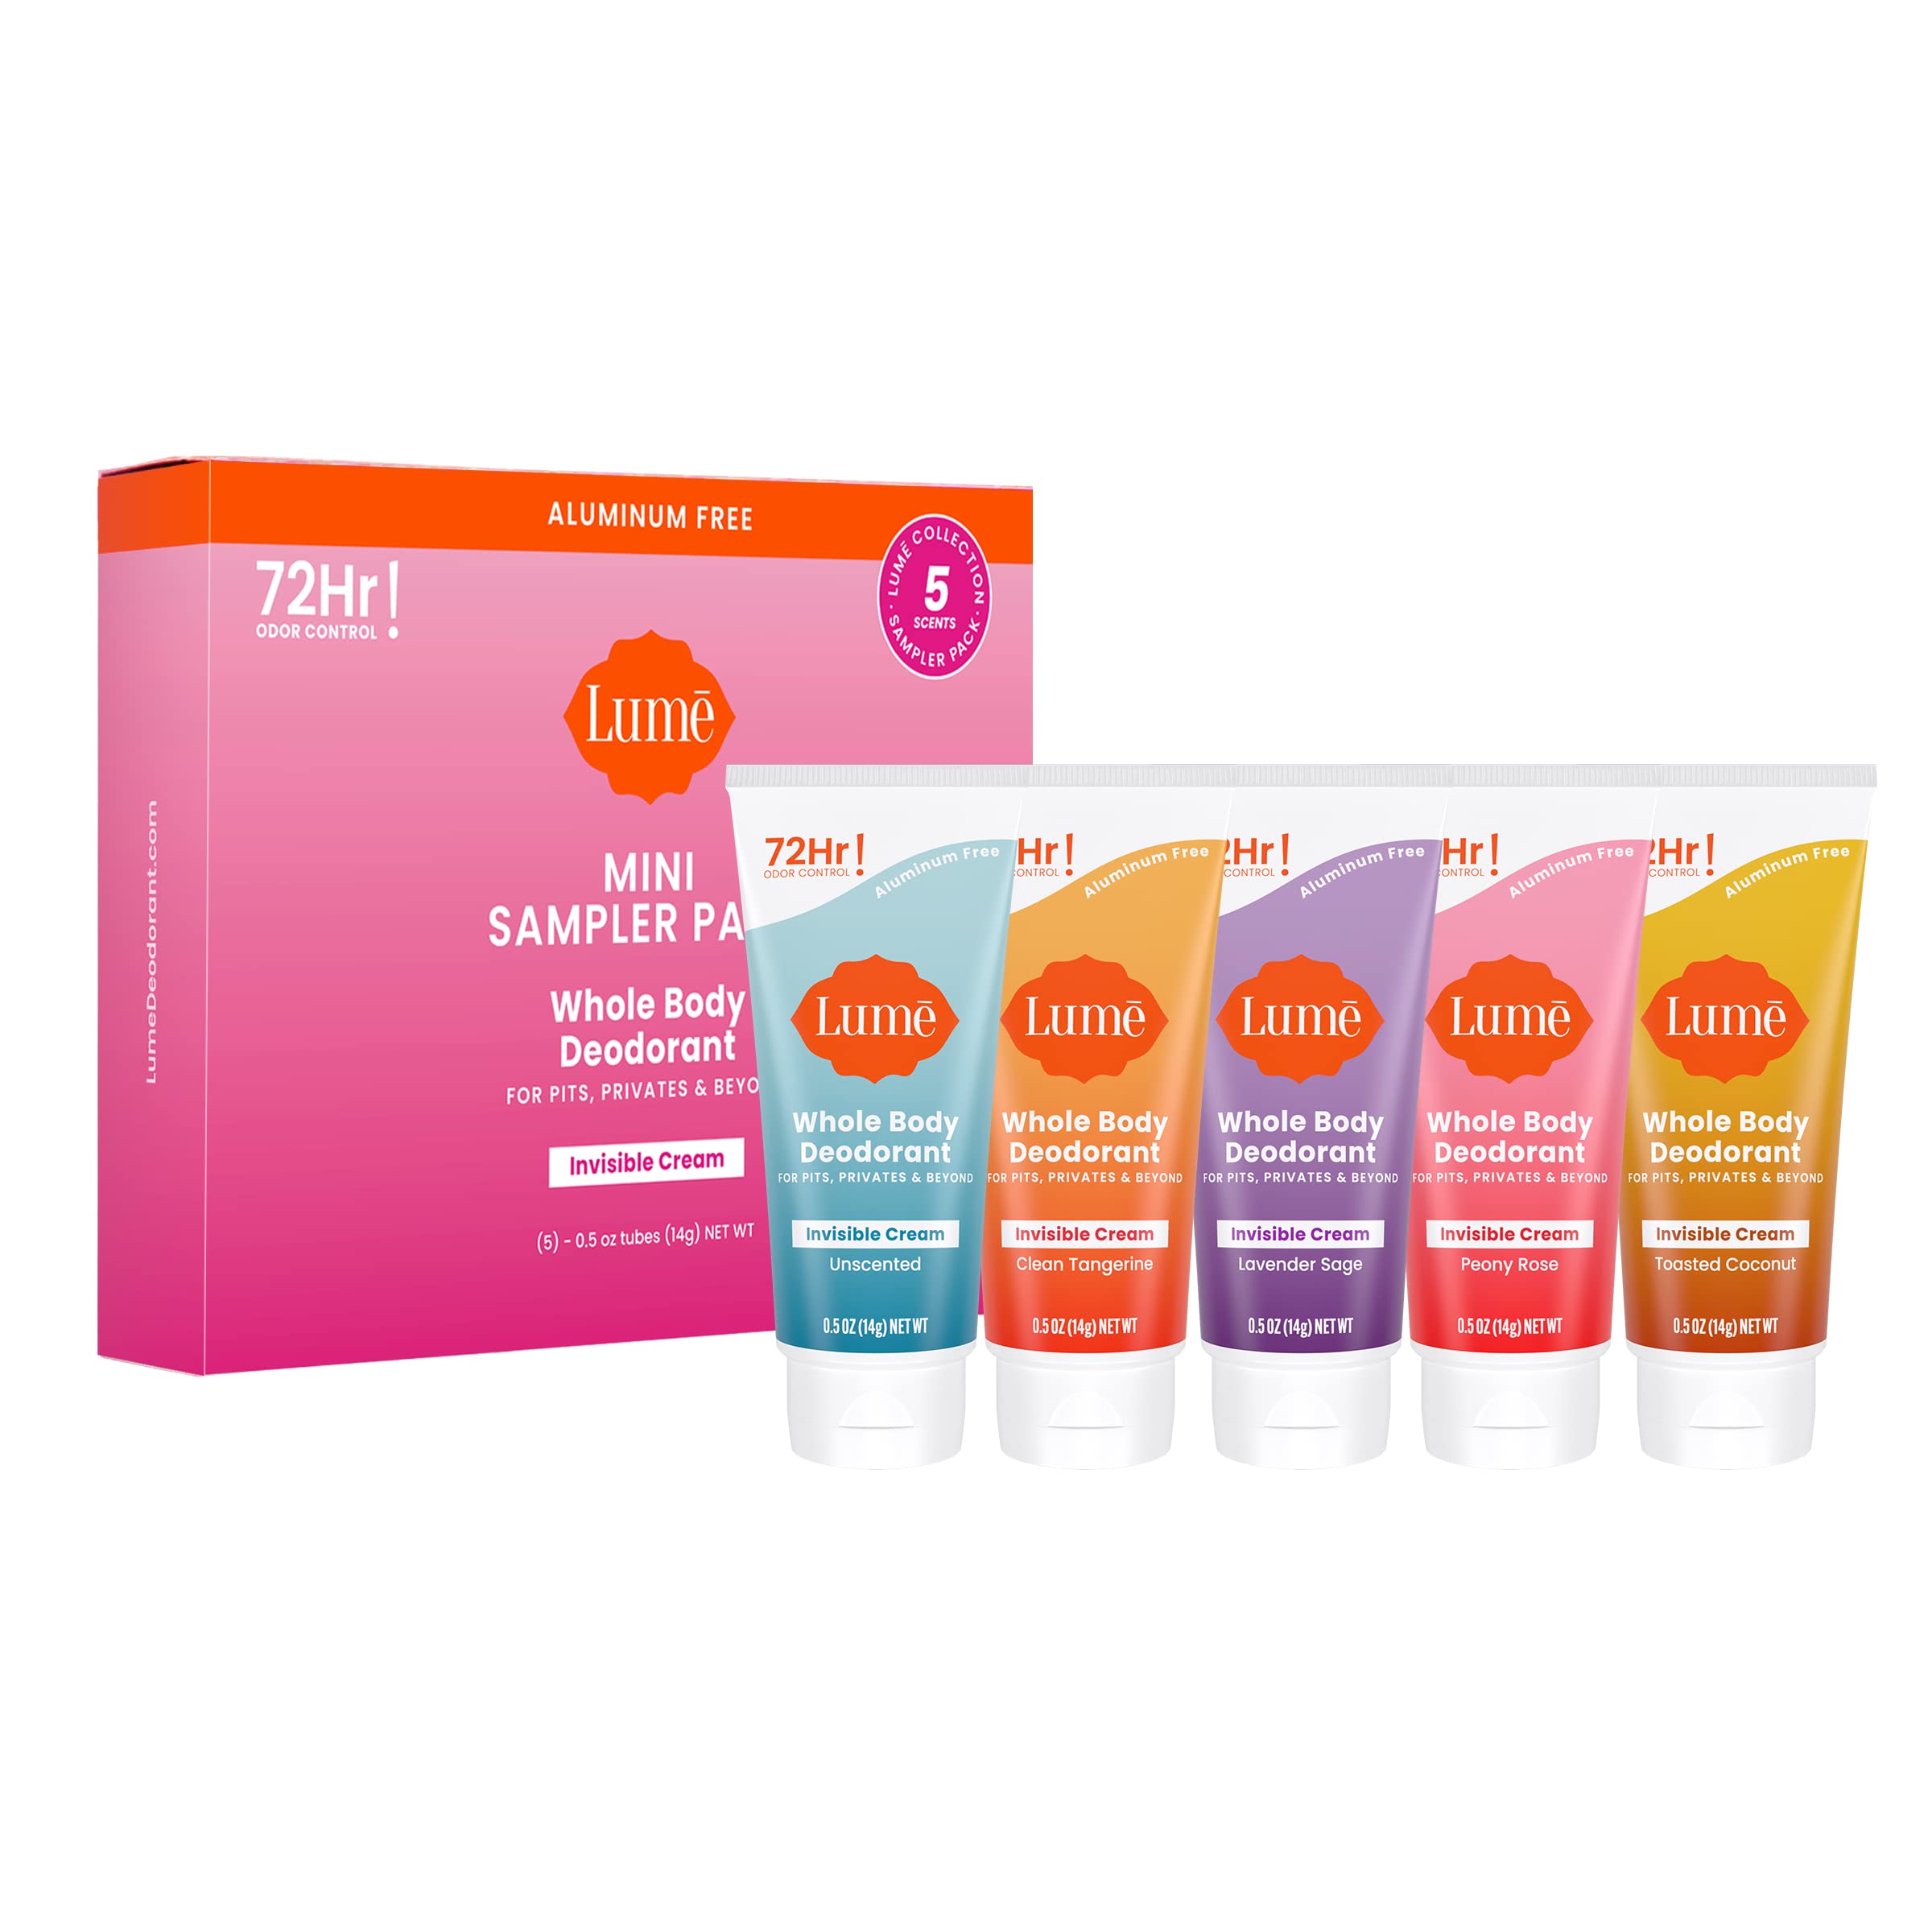 Lume Whole Body Deodorant 5 Pack Sampler - Invisible Cream Tube - 72 Hour Odor Control - Aluminum Free, Baking Soda Free, Skin Safe - .5 ounce Mini Tubes (Clean Tangerine, Lavender Sage, Peony Rose, Toasted Coconut, Unscented)